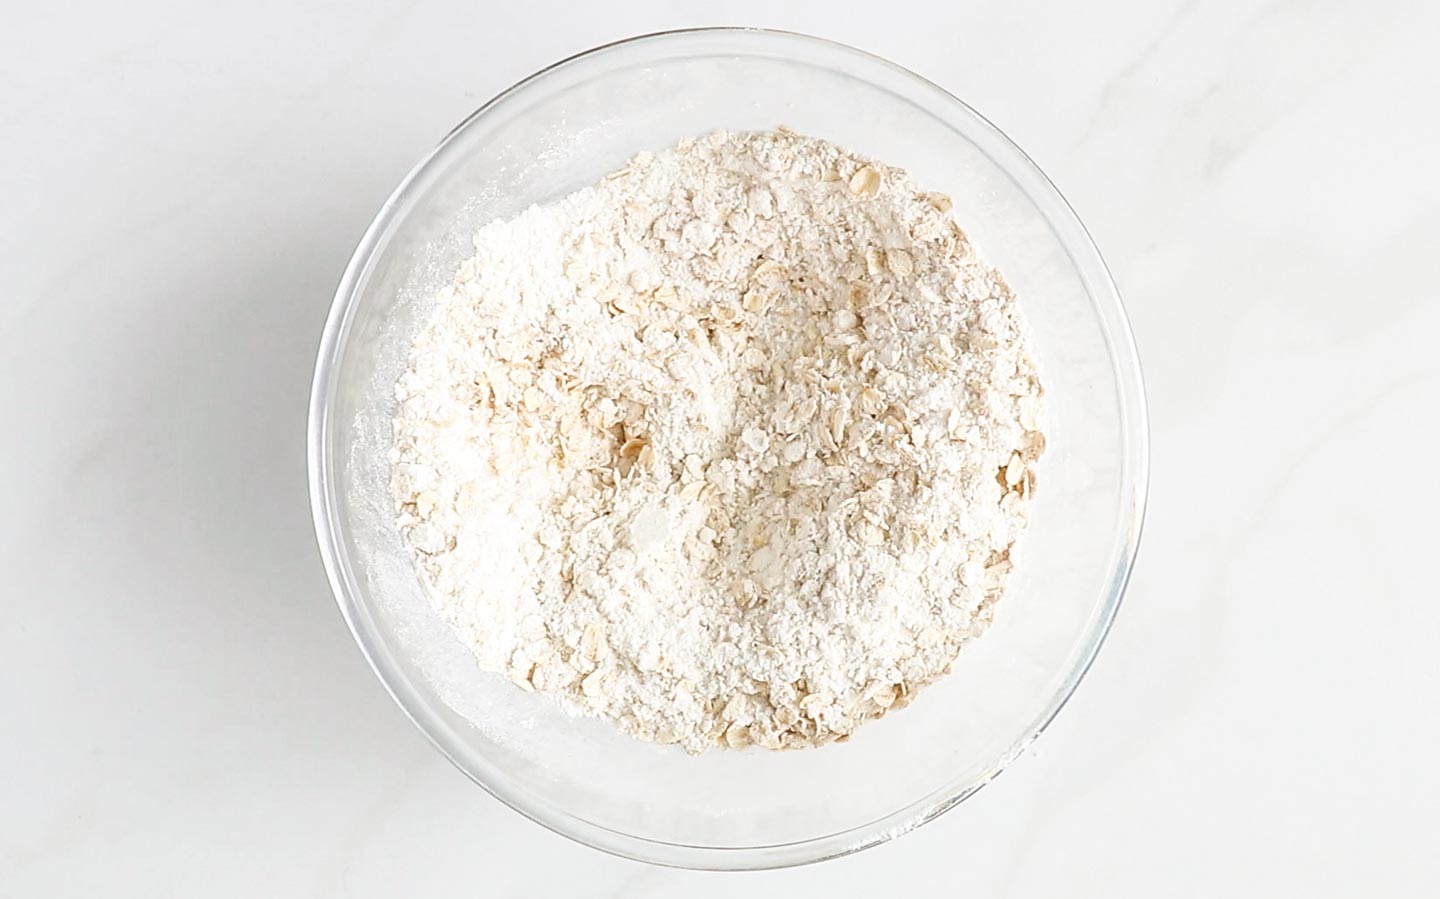 The dry ingredients combined in a bowl.